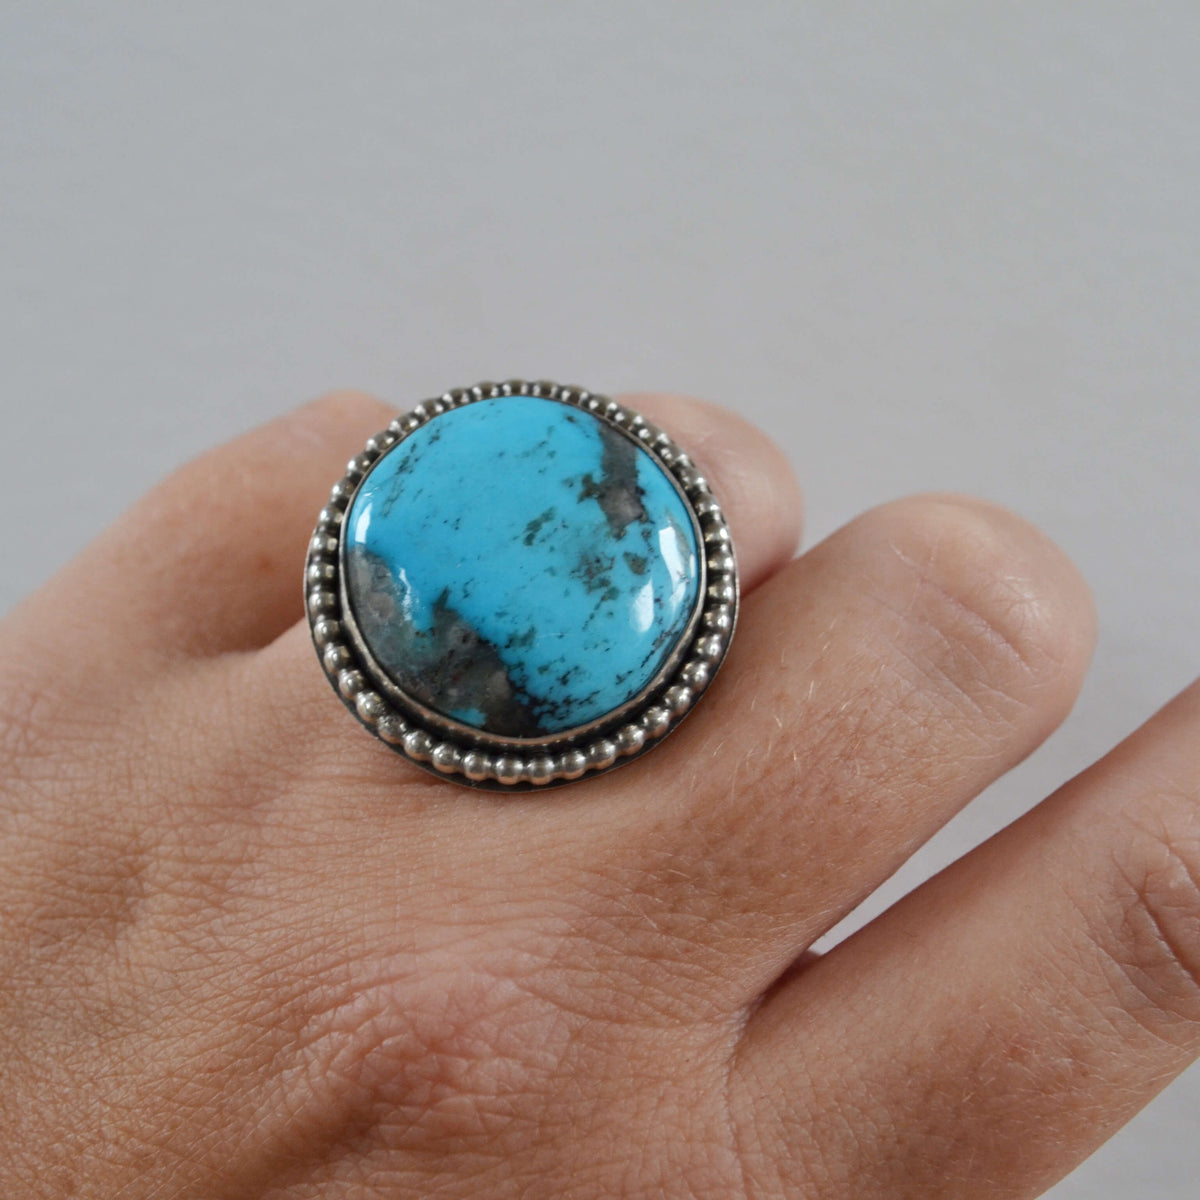 Arizona Kingman Turquoise Sterling Silver Ring, One of a Kind